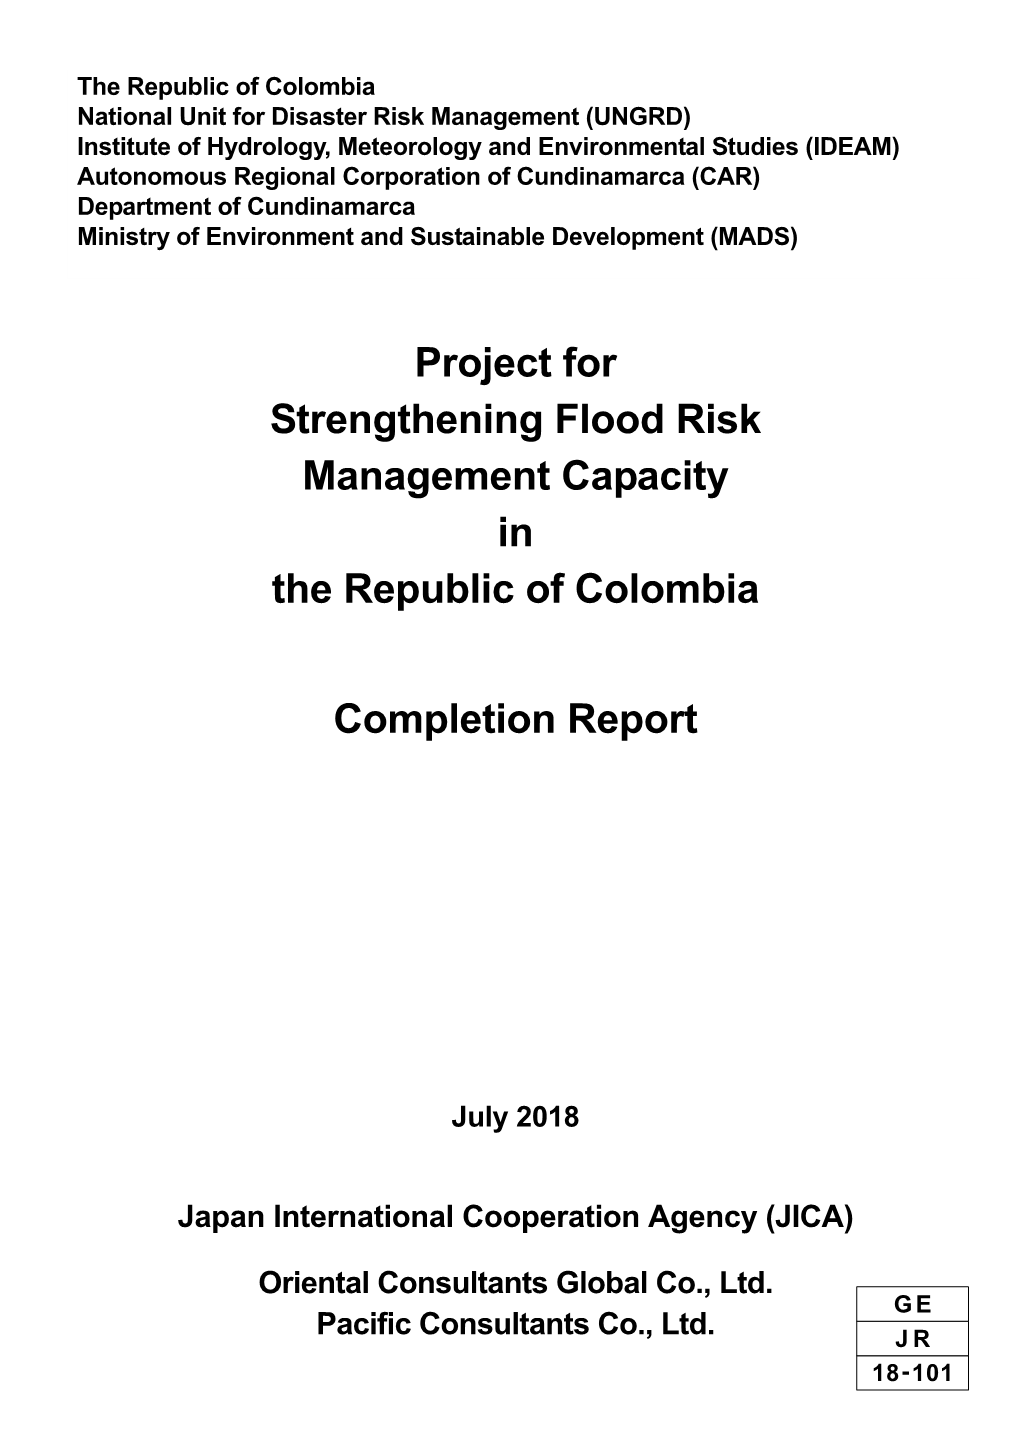 Project for Strengthening Flood Risk Management Capacity in the Republic of Colombia